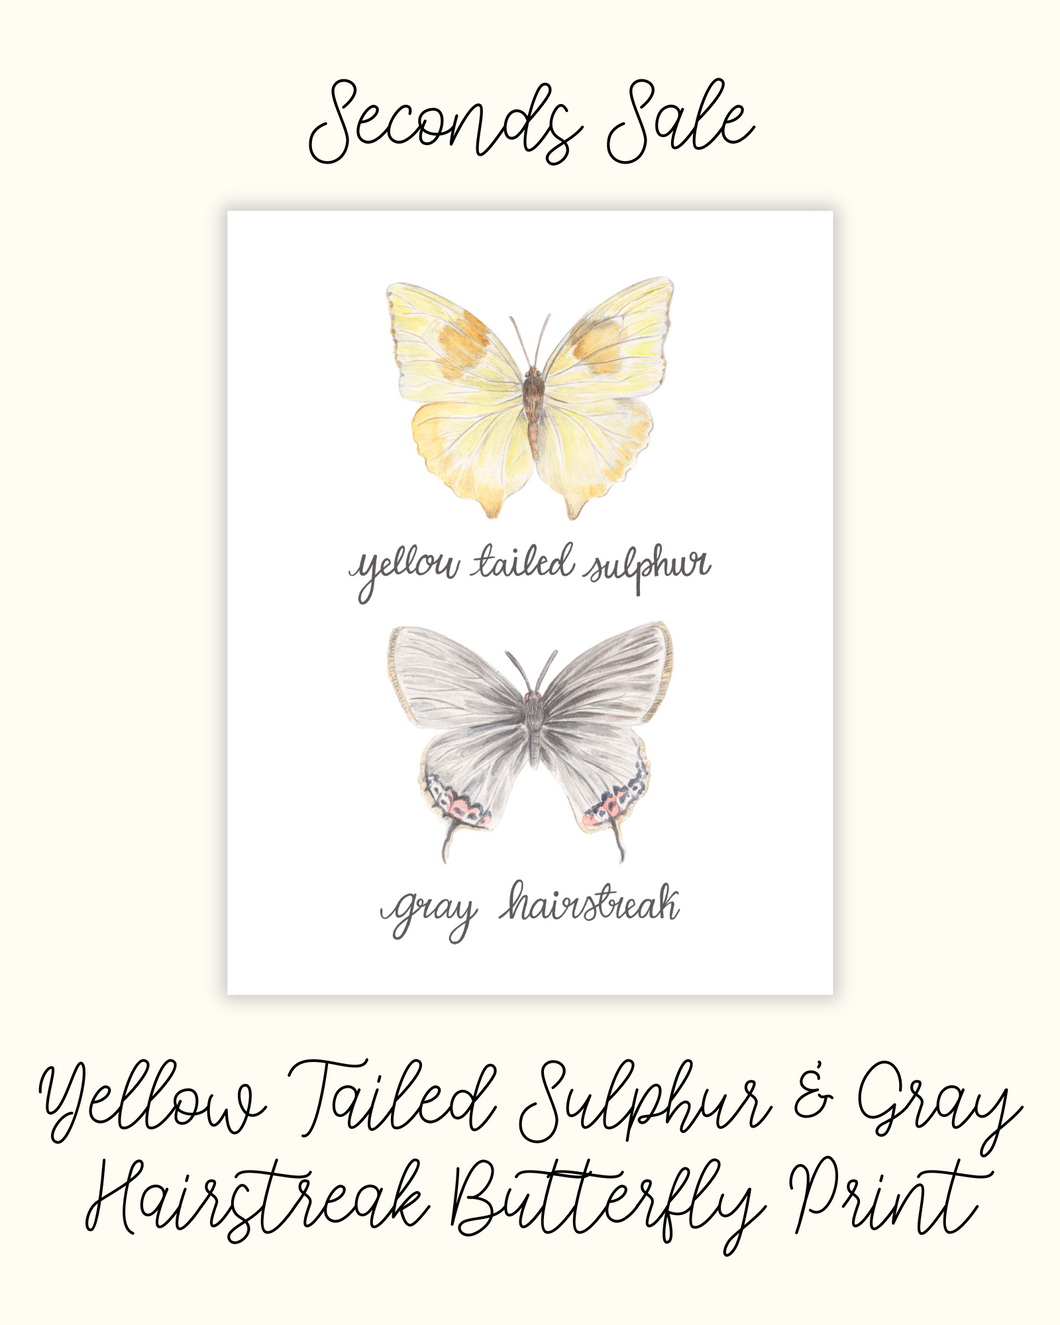 Yellow Tailed Sulphur and Gray Hairstreak Butterfly - Seconds Sale